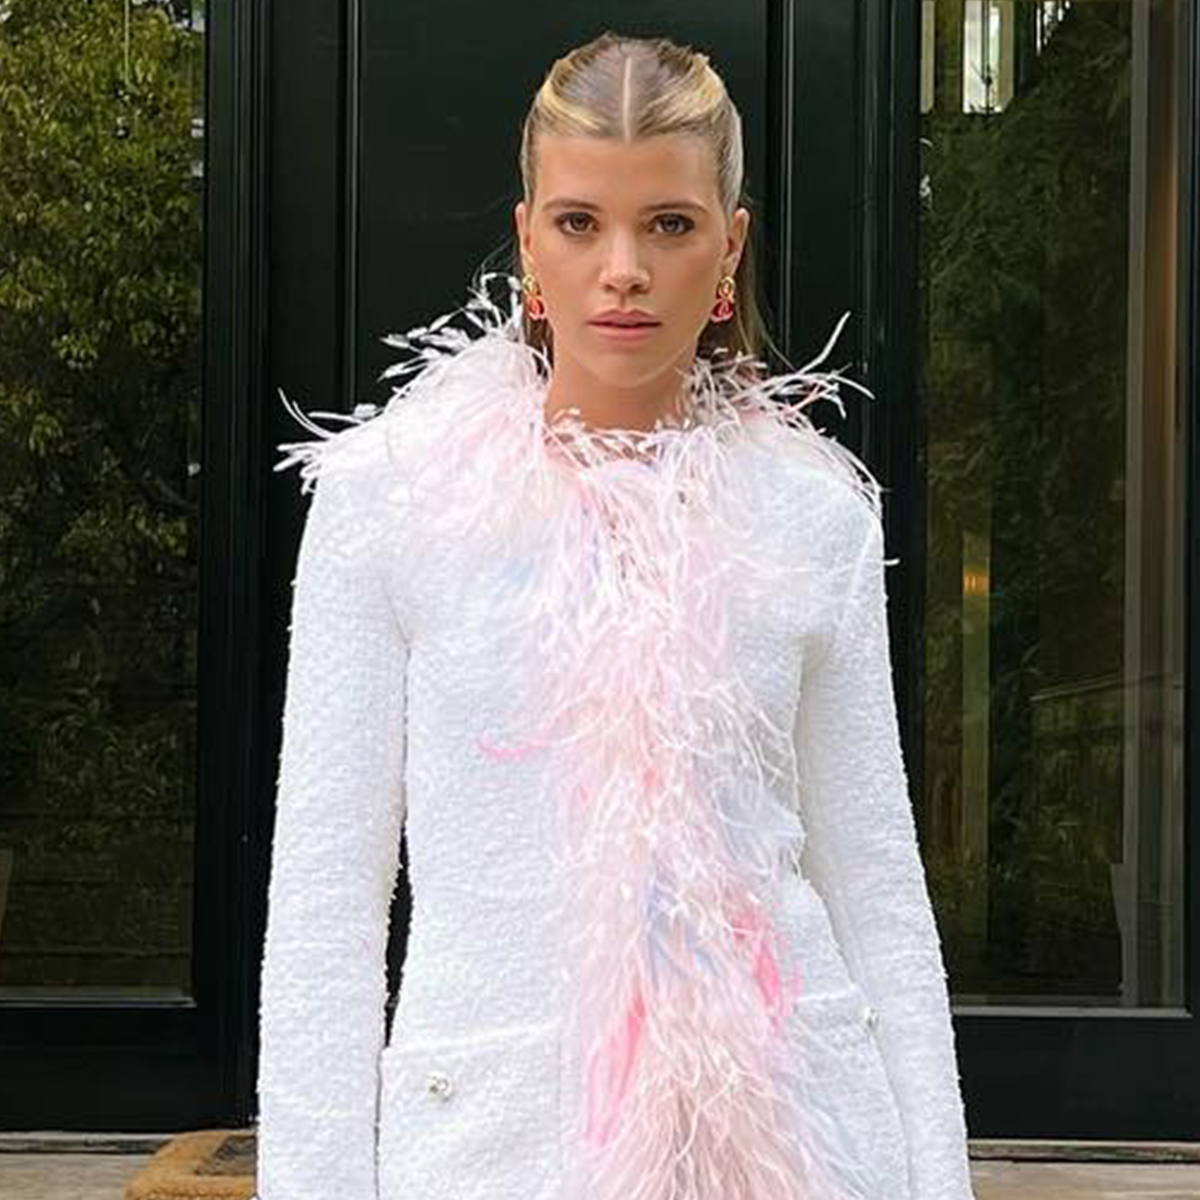 How Sofia Richie Is Following in Sister Nicole’s Fashion Footsteps